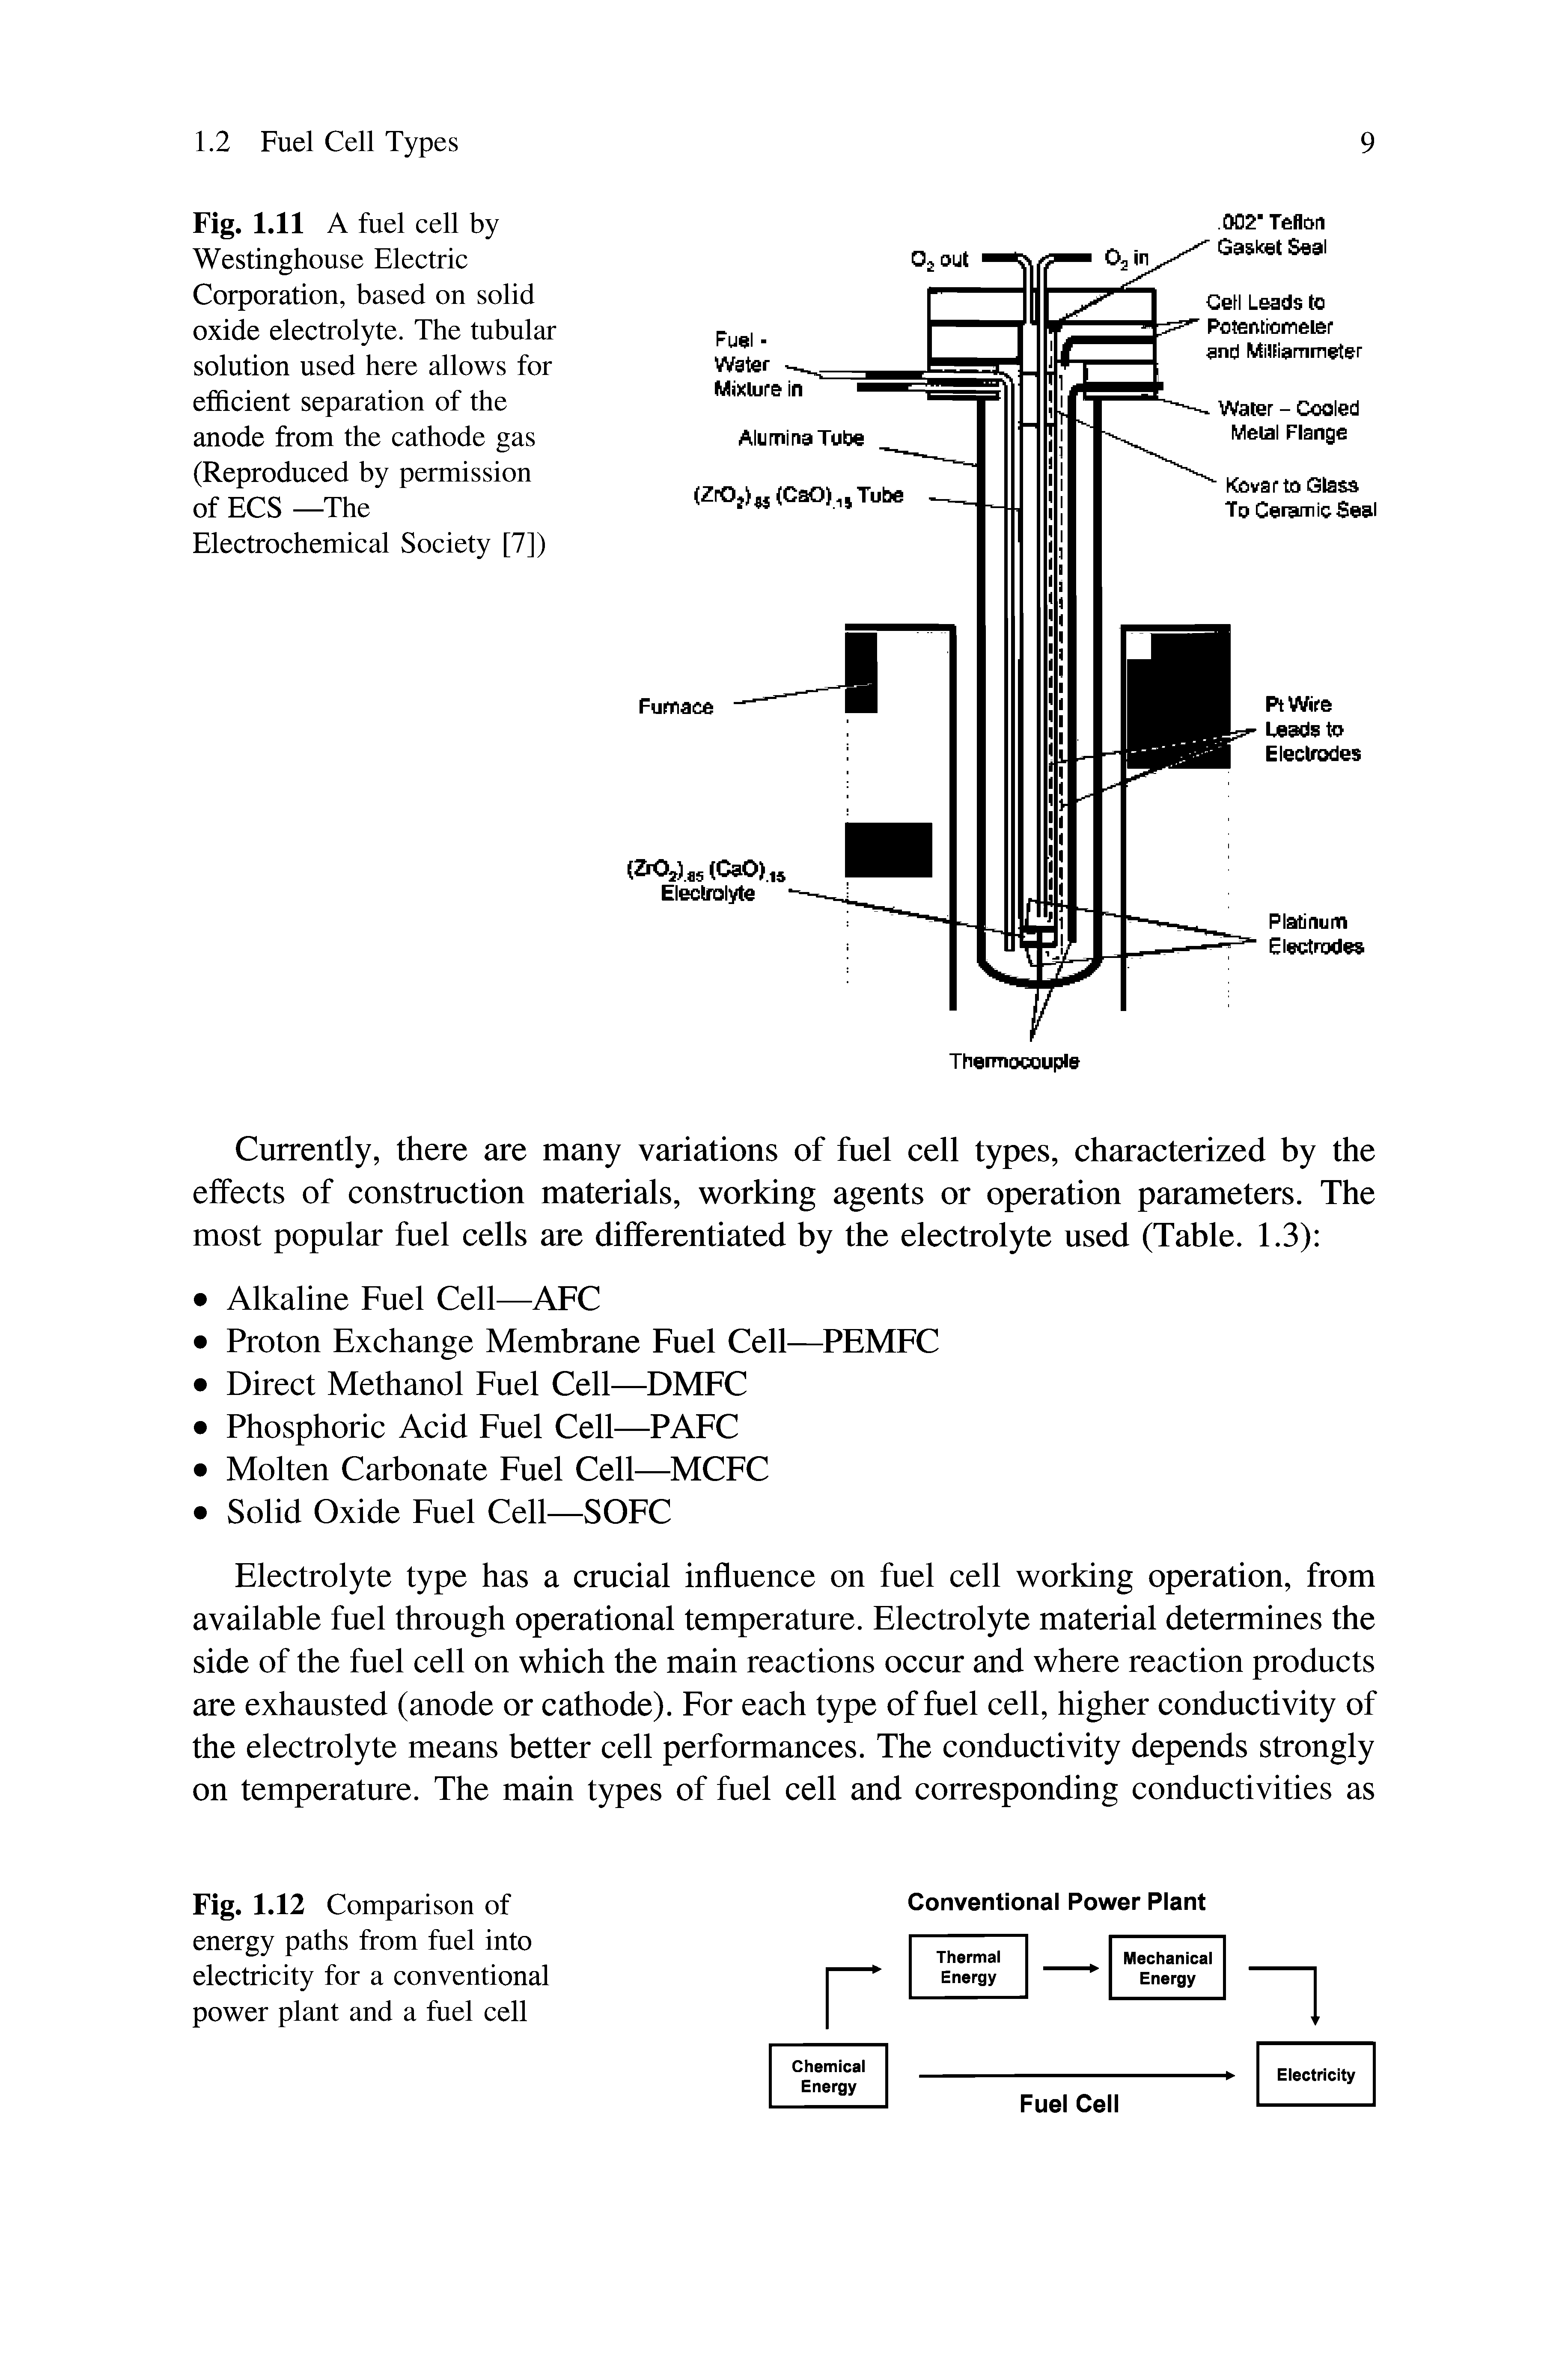 Fig. 1.11 A fuel cell by Westinghouse Electric Corporation, based on solid oxide electrolyte. The tubular solution used here allows for efficient separation of the anode from the cathode gas (Reproduced by permission of ECS —The Electrochemical Society [7])...